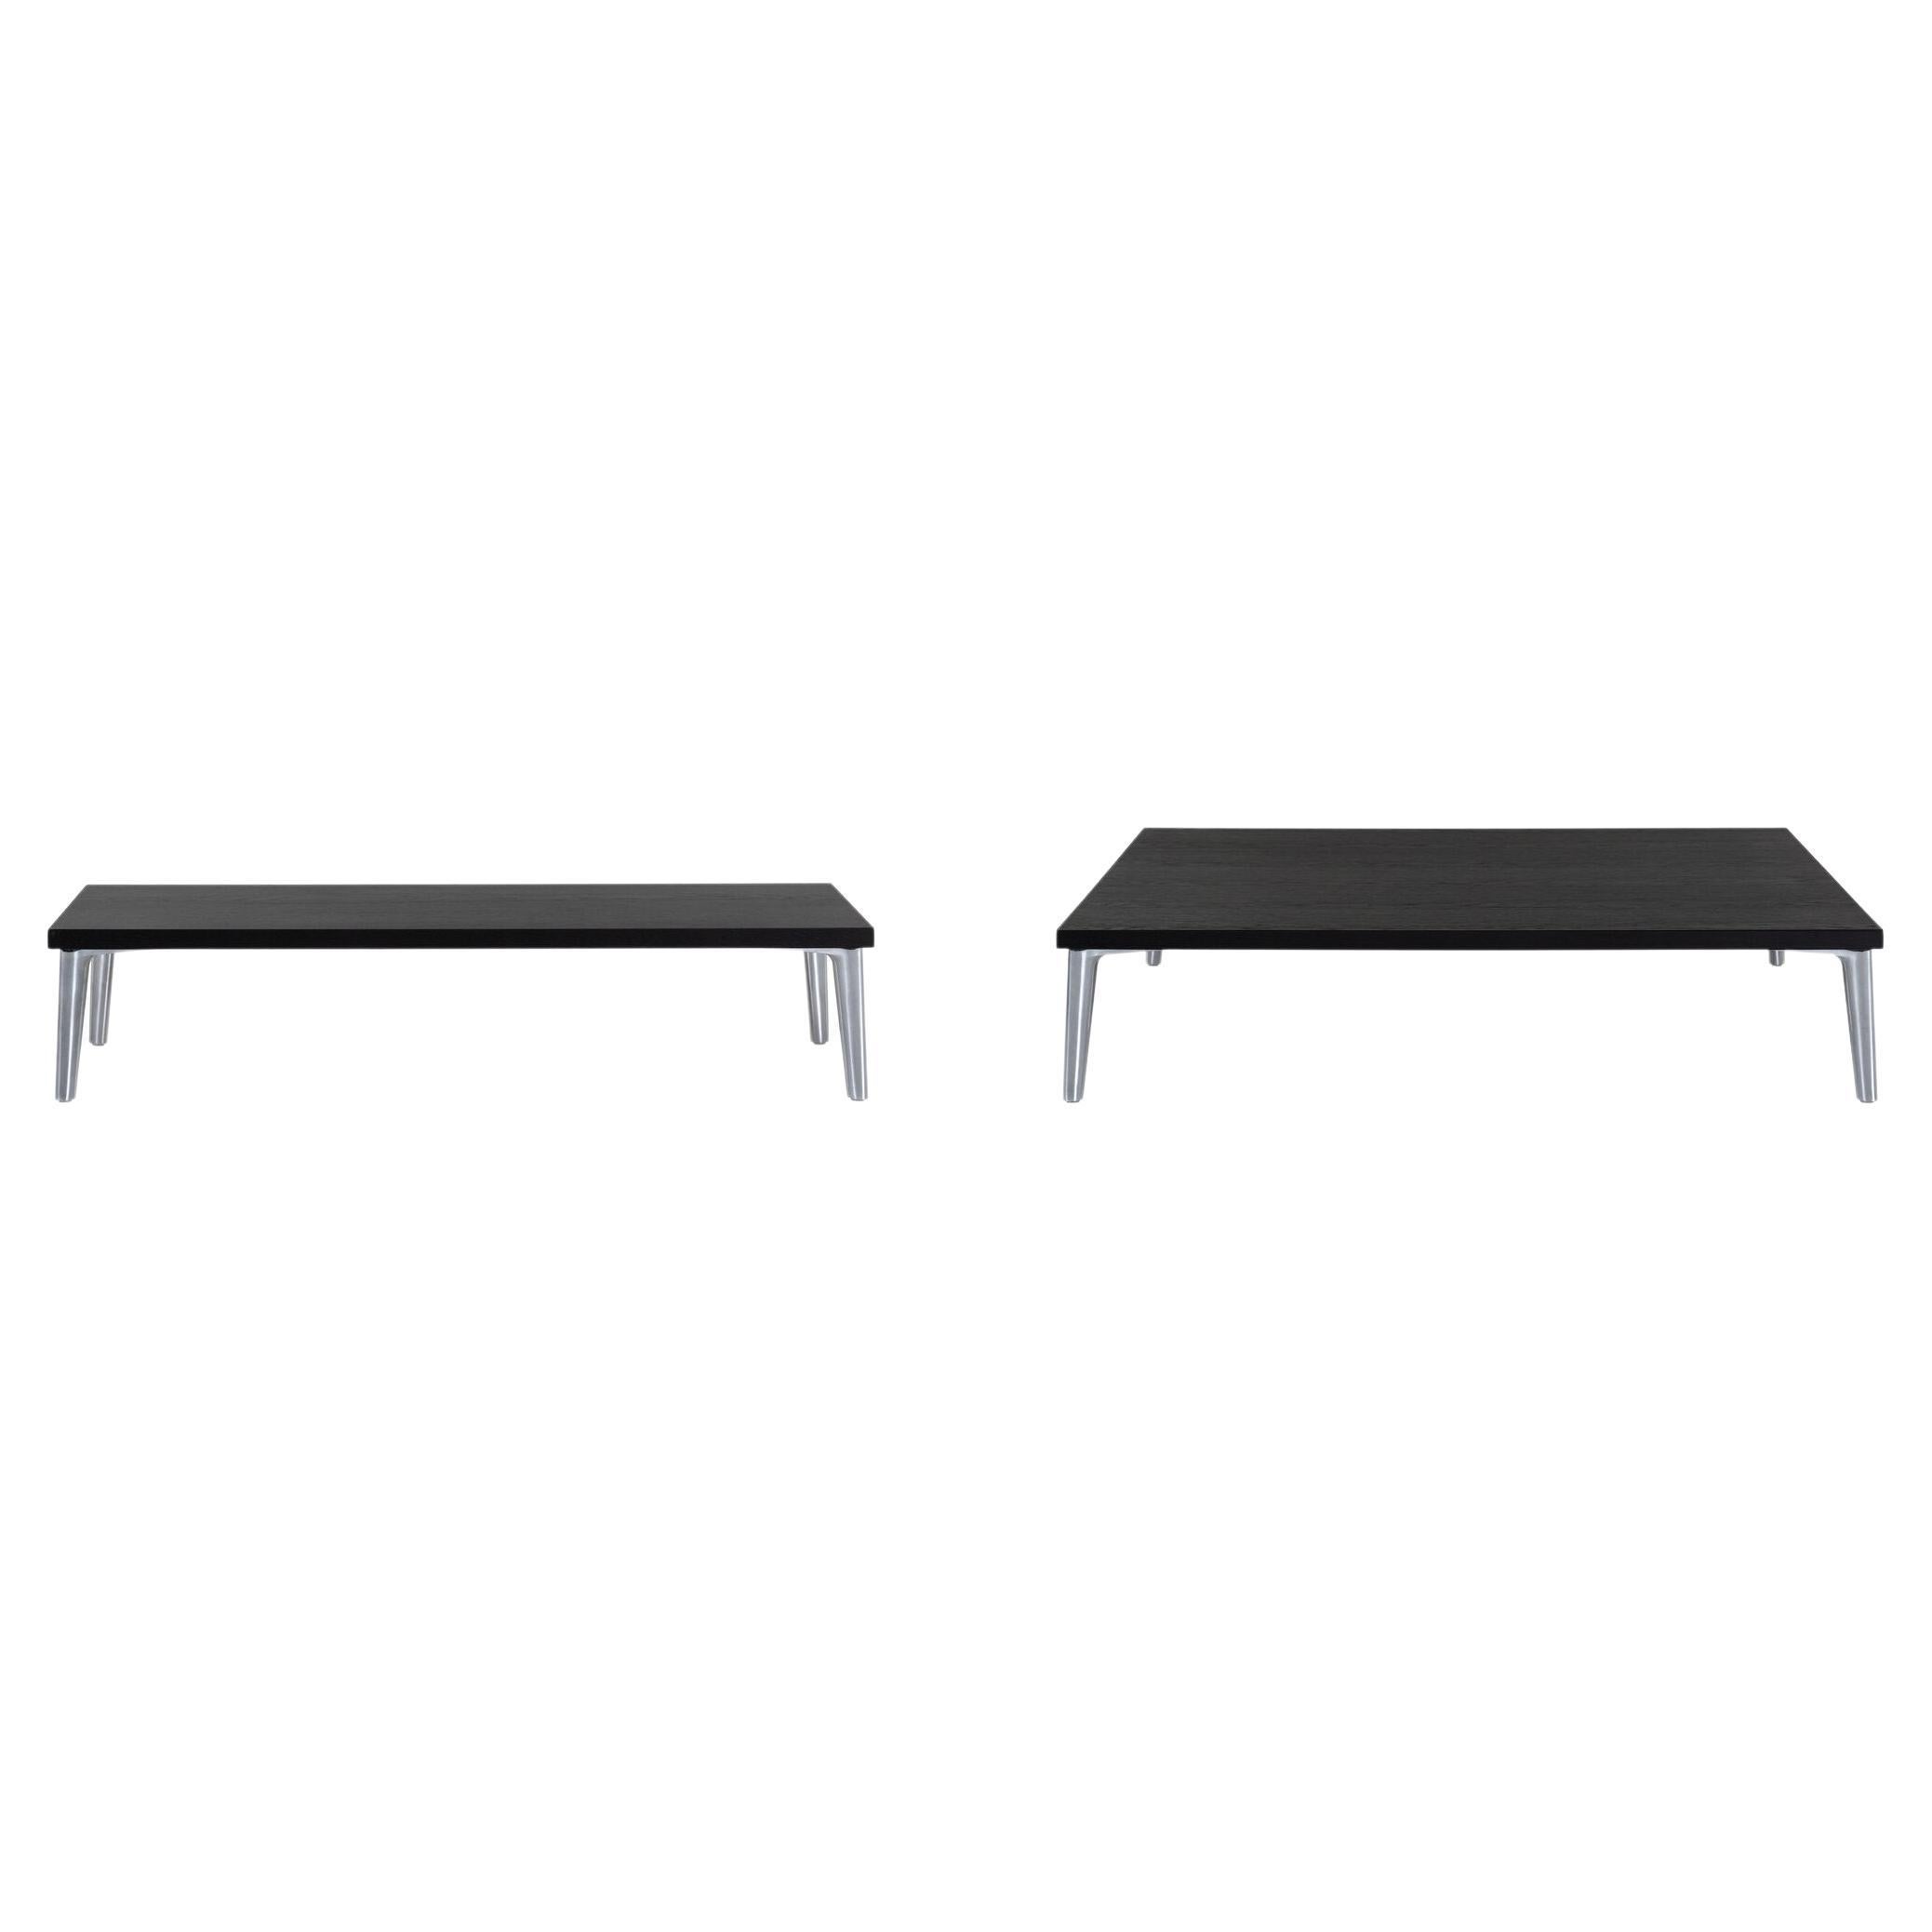 Moooi Sofa So Good Table Wenge Stained by Marcel Wanders Studio For Sale